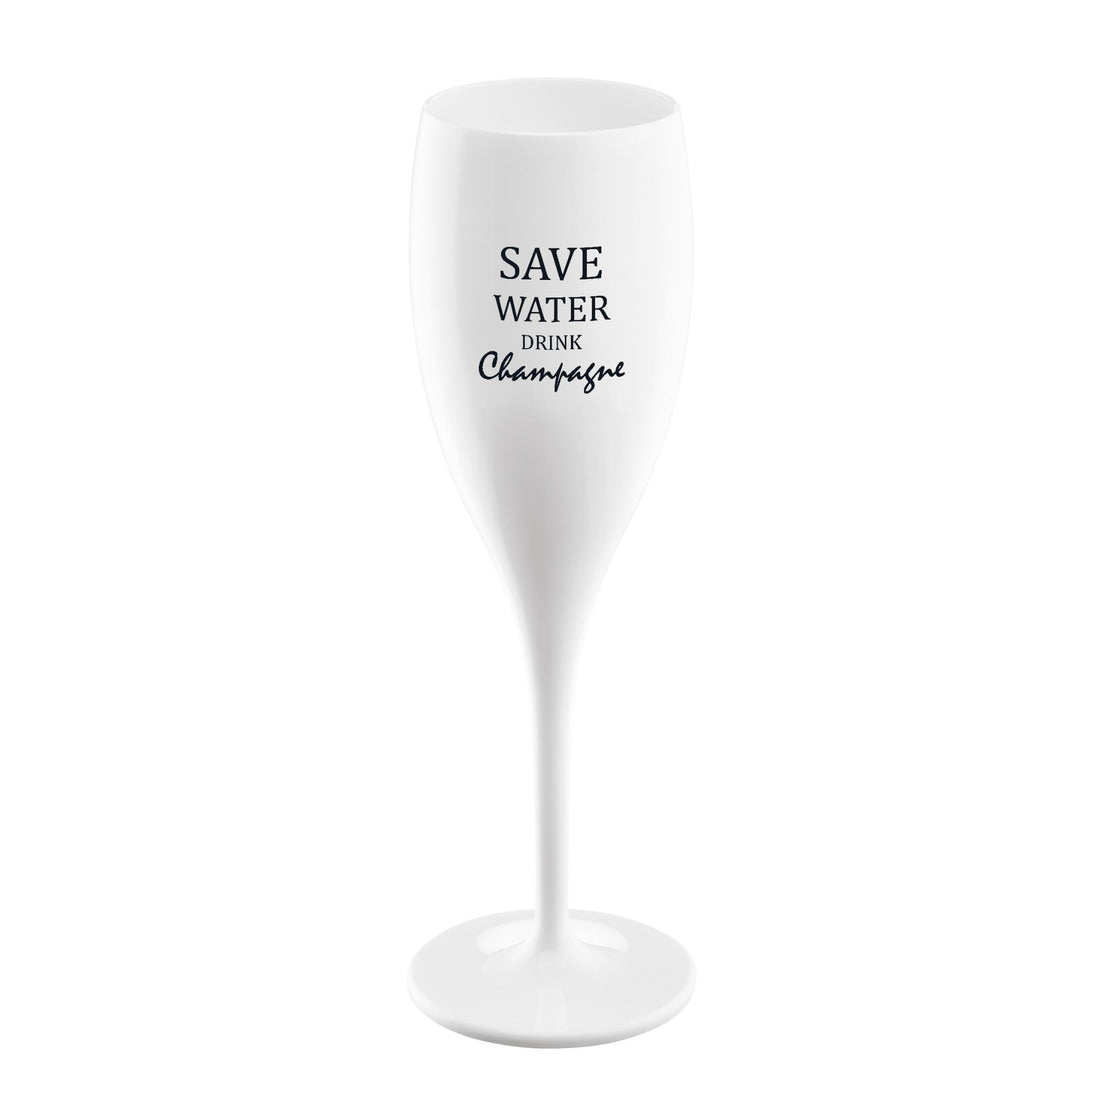 KOZIOL Calice Spumante Champagne 100ml Cheers No. 1 Save Water Drink Champagne Bianco